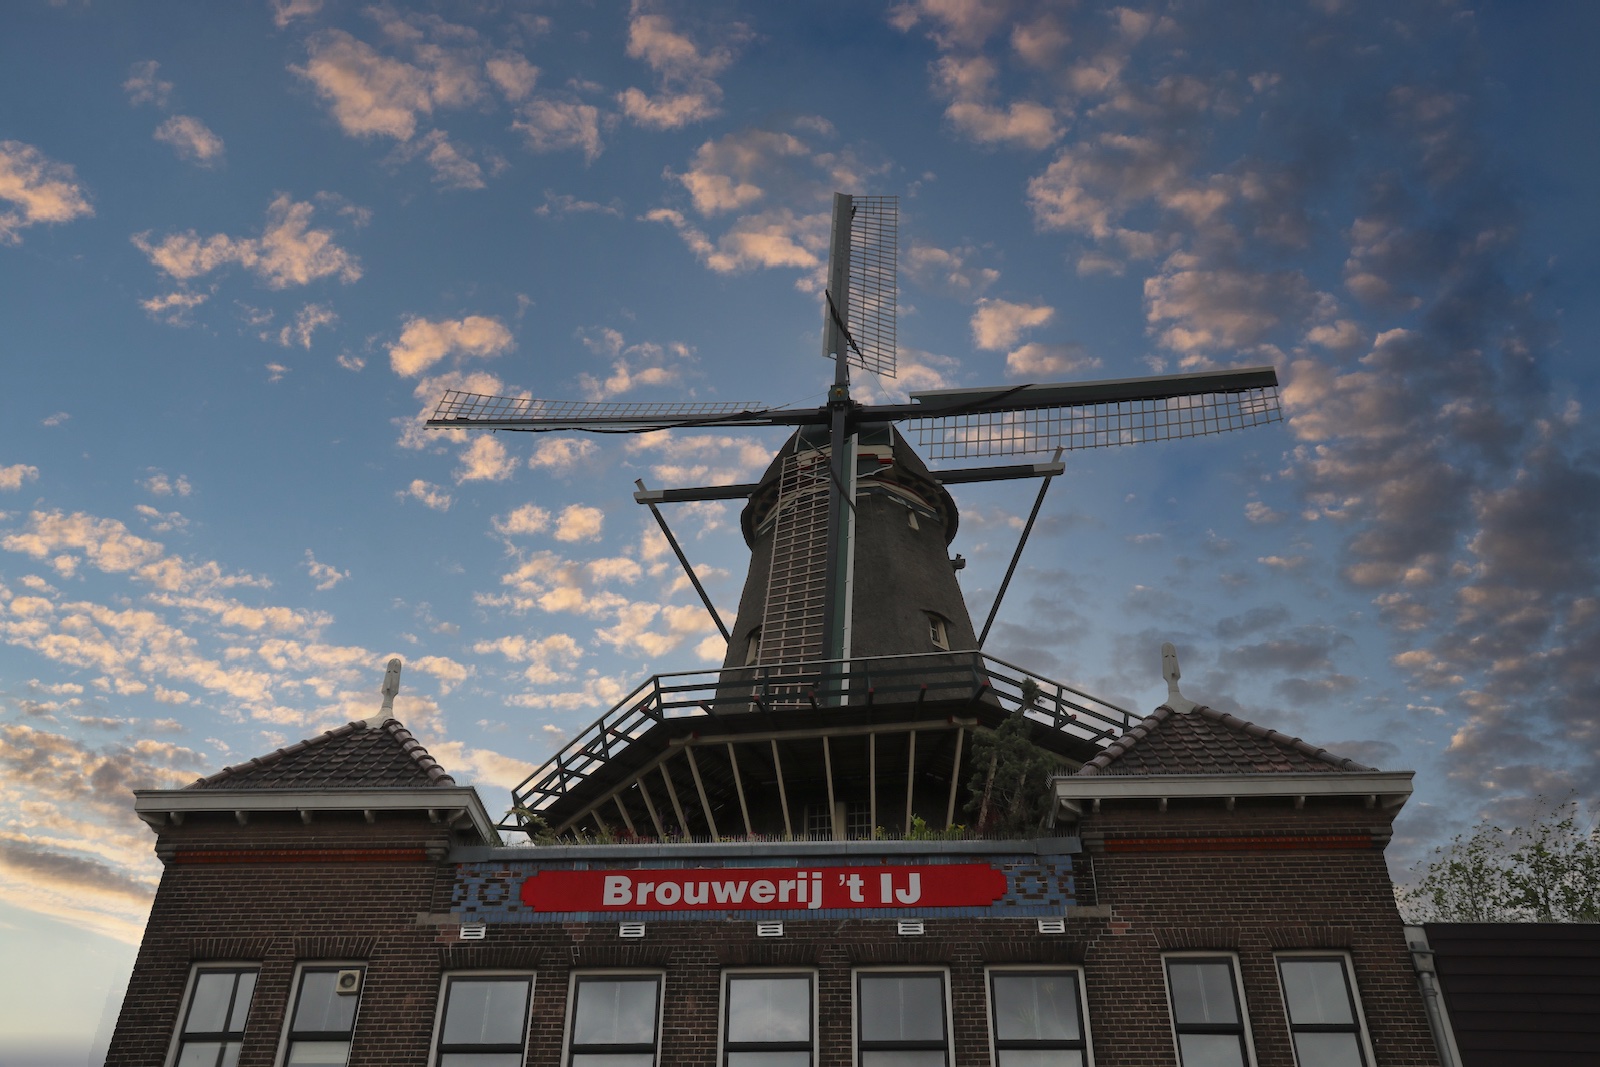 The iconic windmill next to Brouwerij 't IJ